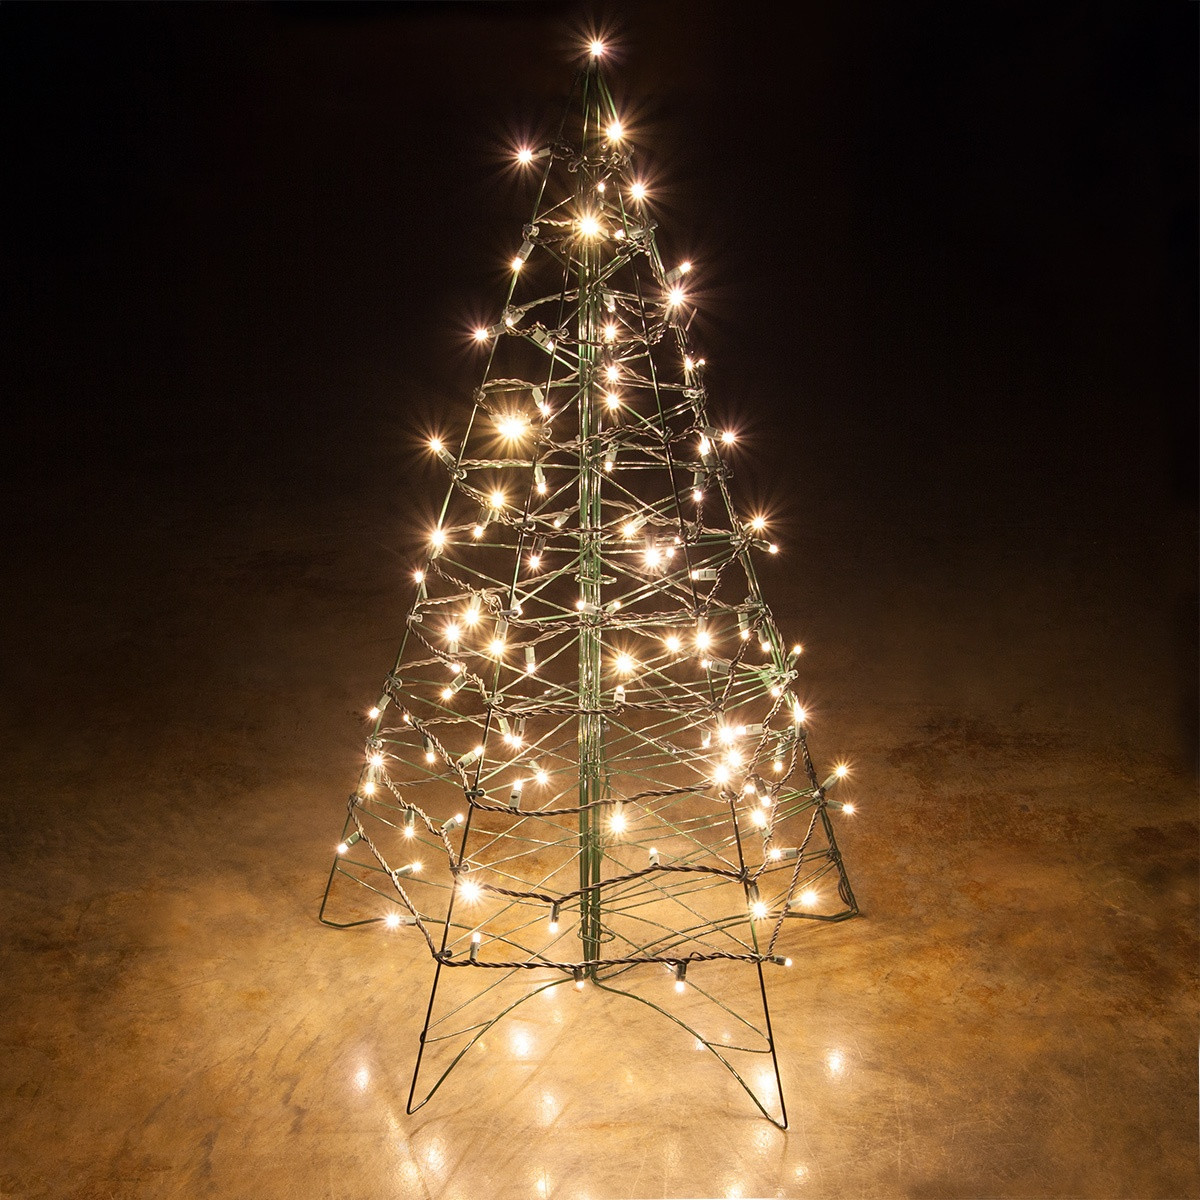 Led Outdoor Christmas Tree
 Lighted Warm White LED Outdoor Christmas Tree